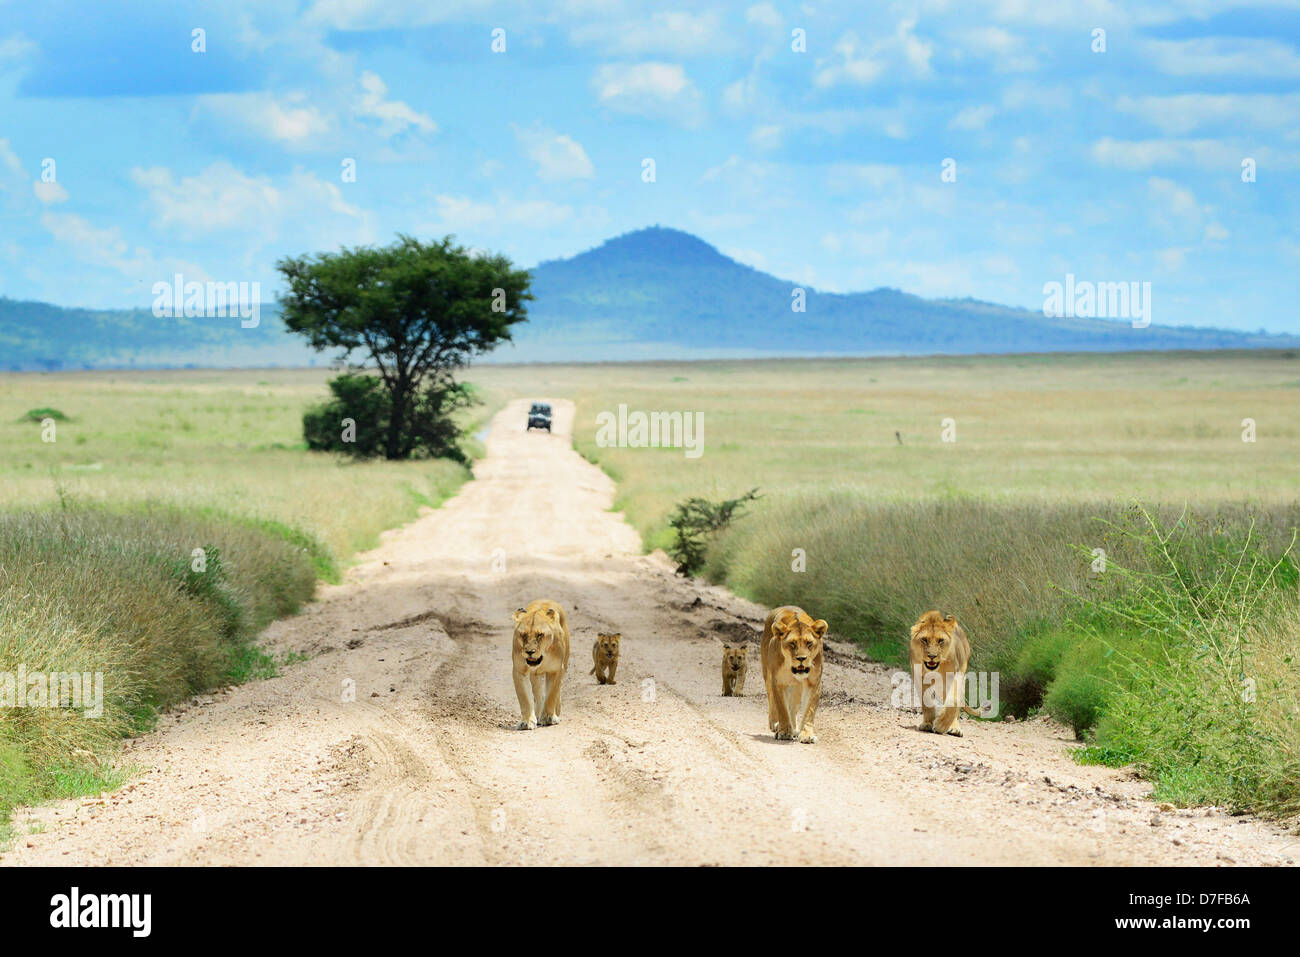 A young family of lions walking on the dirt road in Serengeti national park. Stock Photo